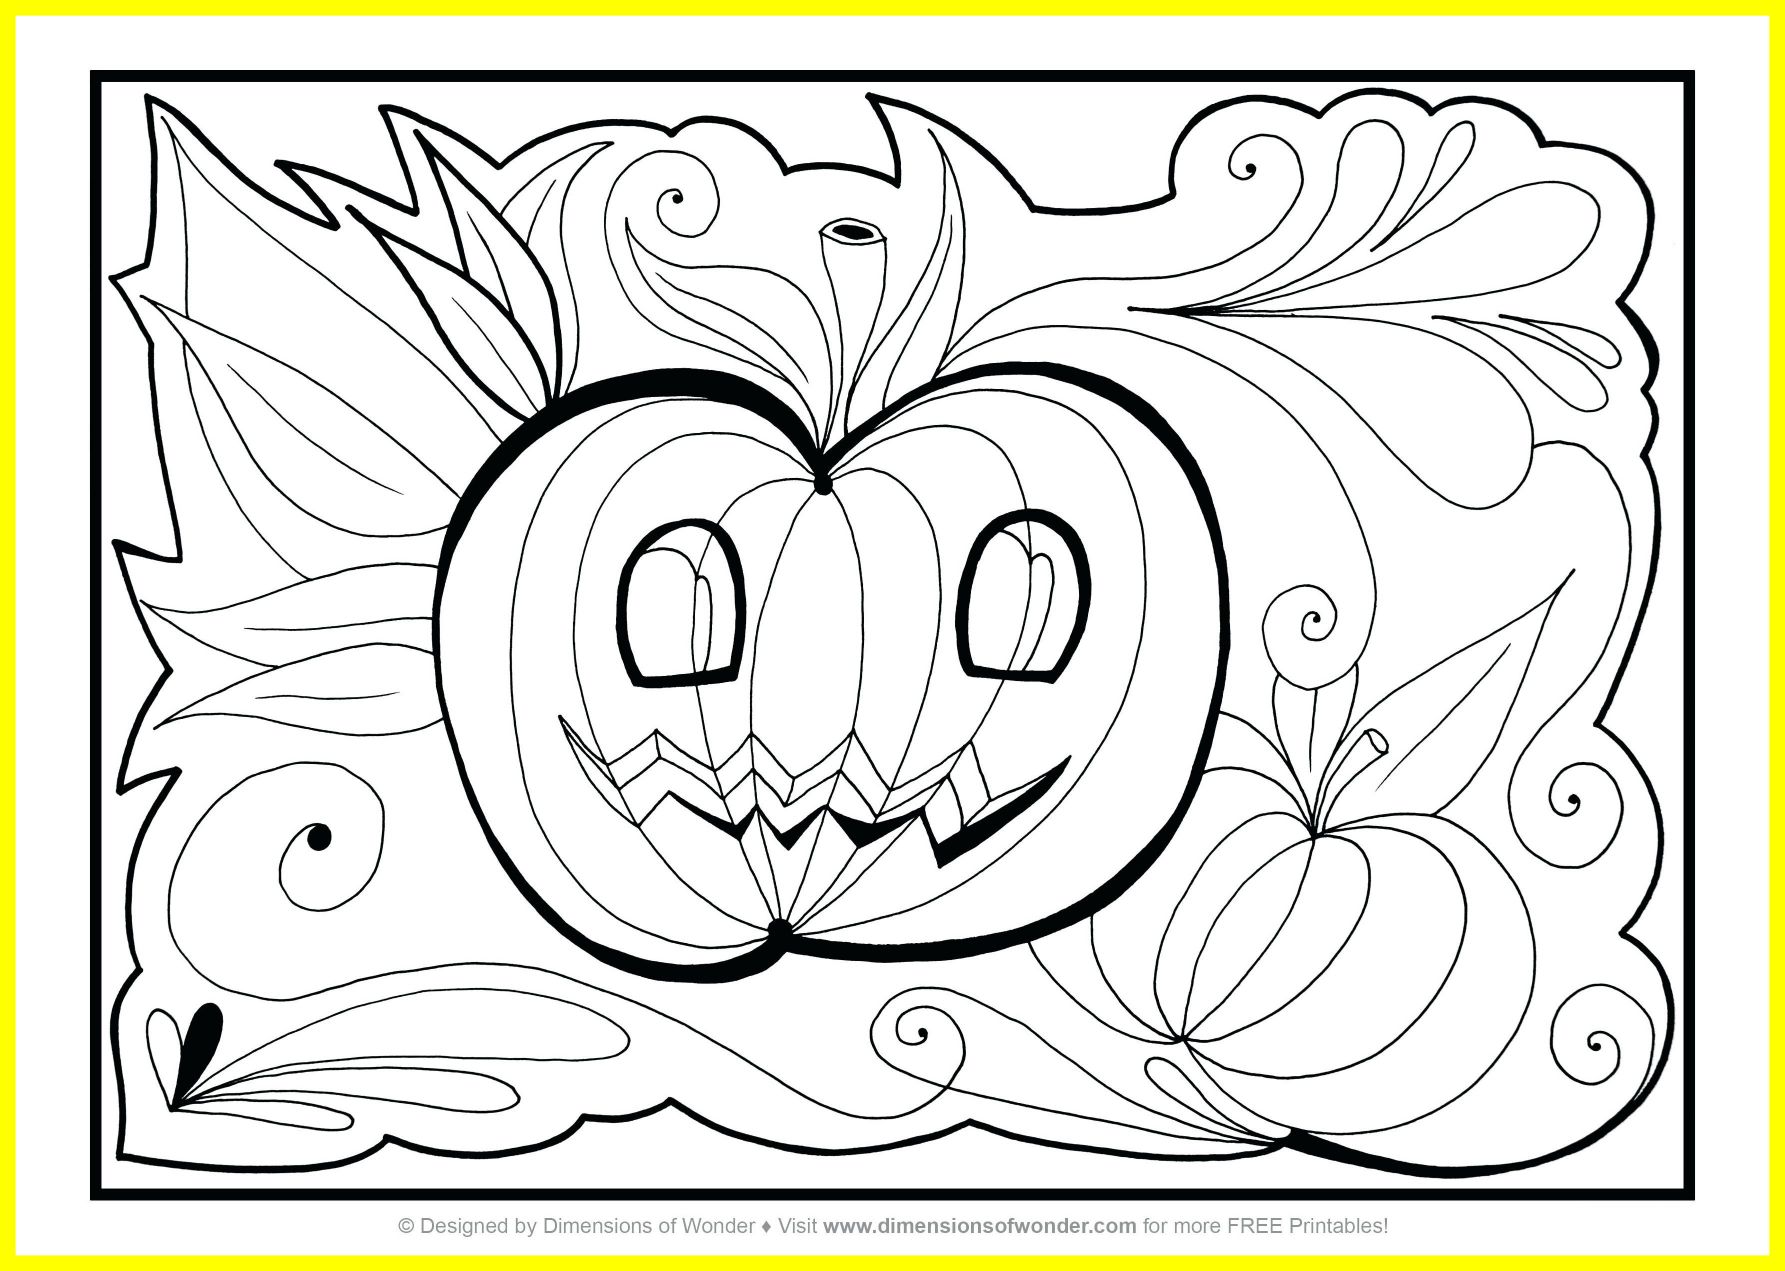 Anime Halloween Coloring Pages at GetDrawings | Free download